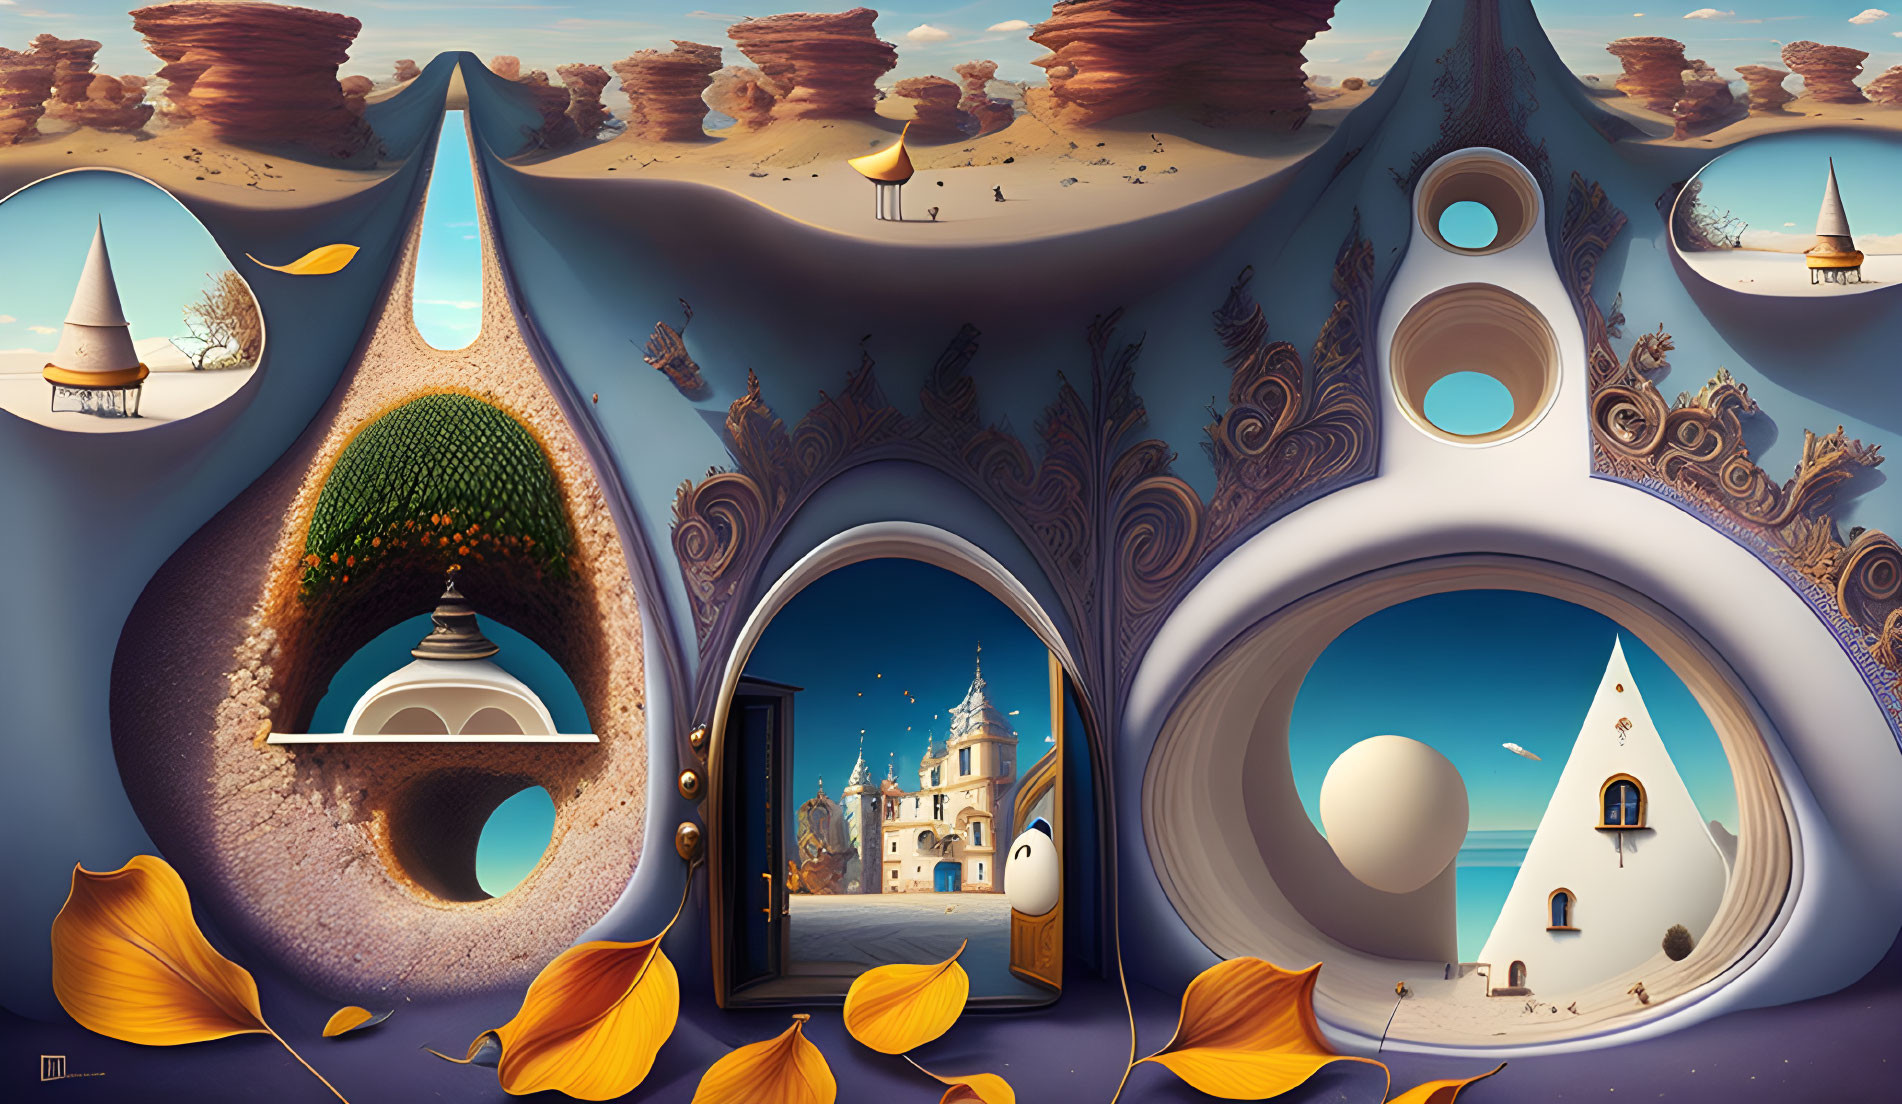 Whimsical surreal landscape with fantasy architecture and floating leaves